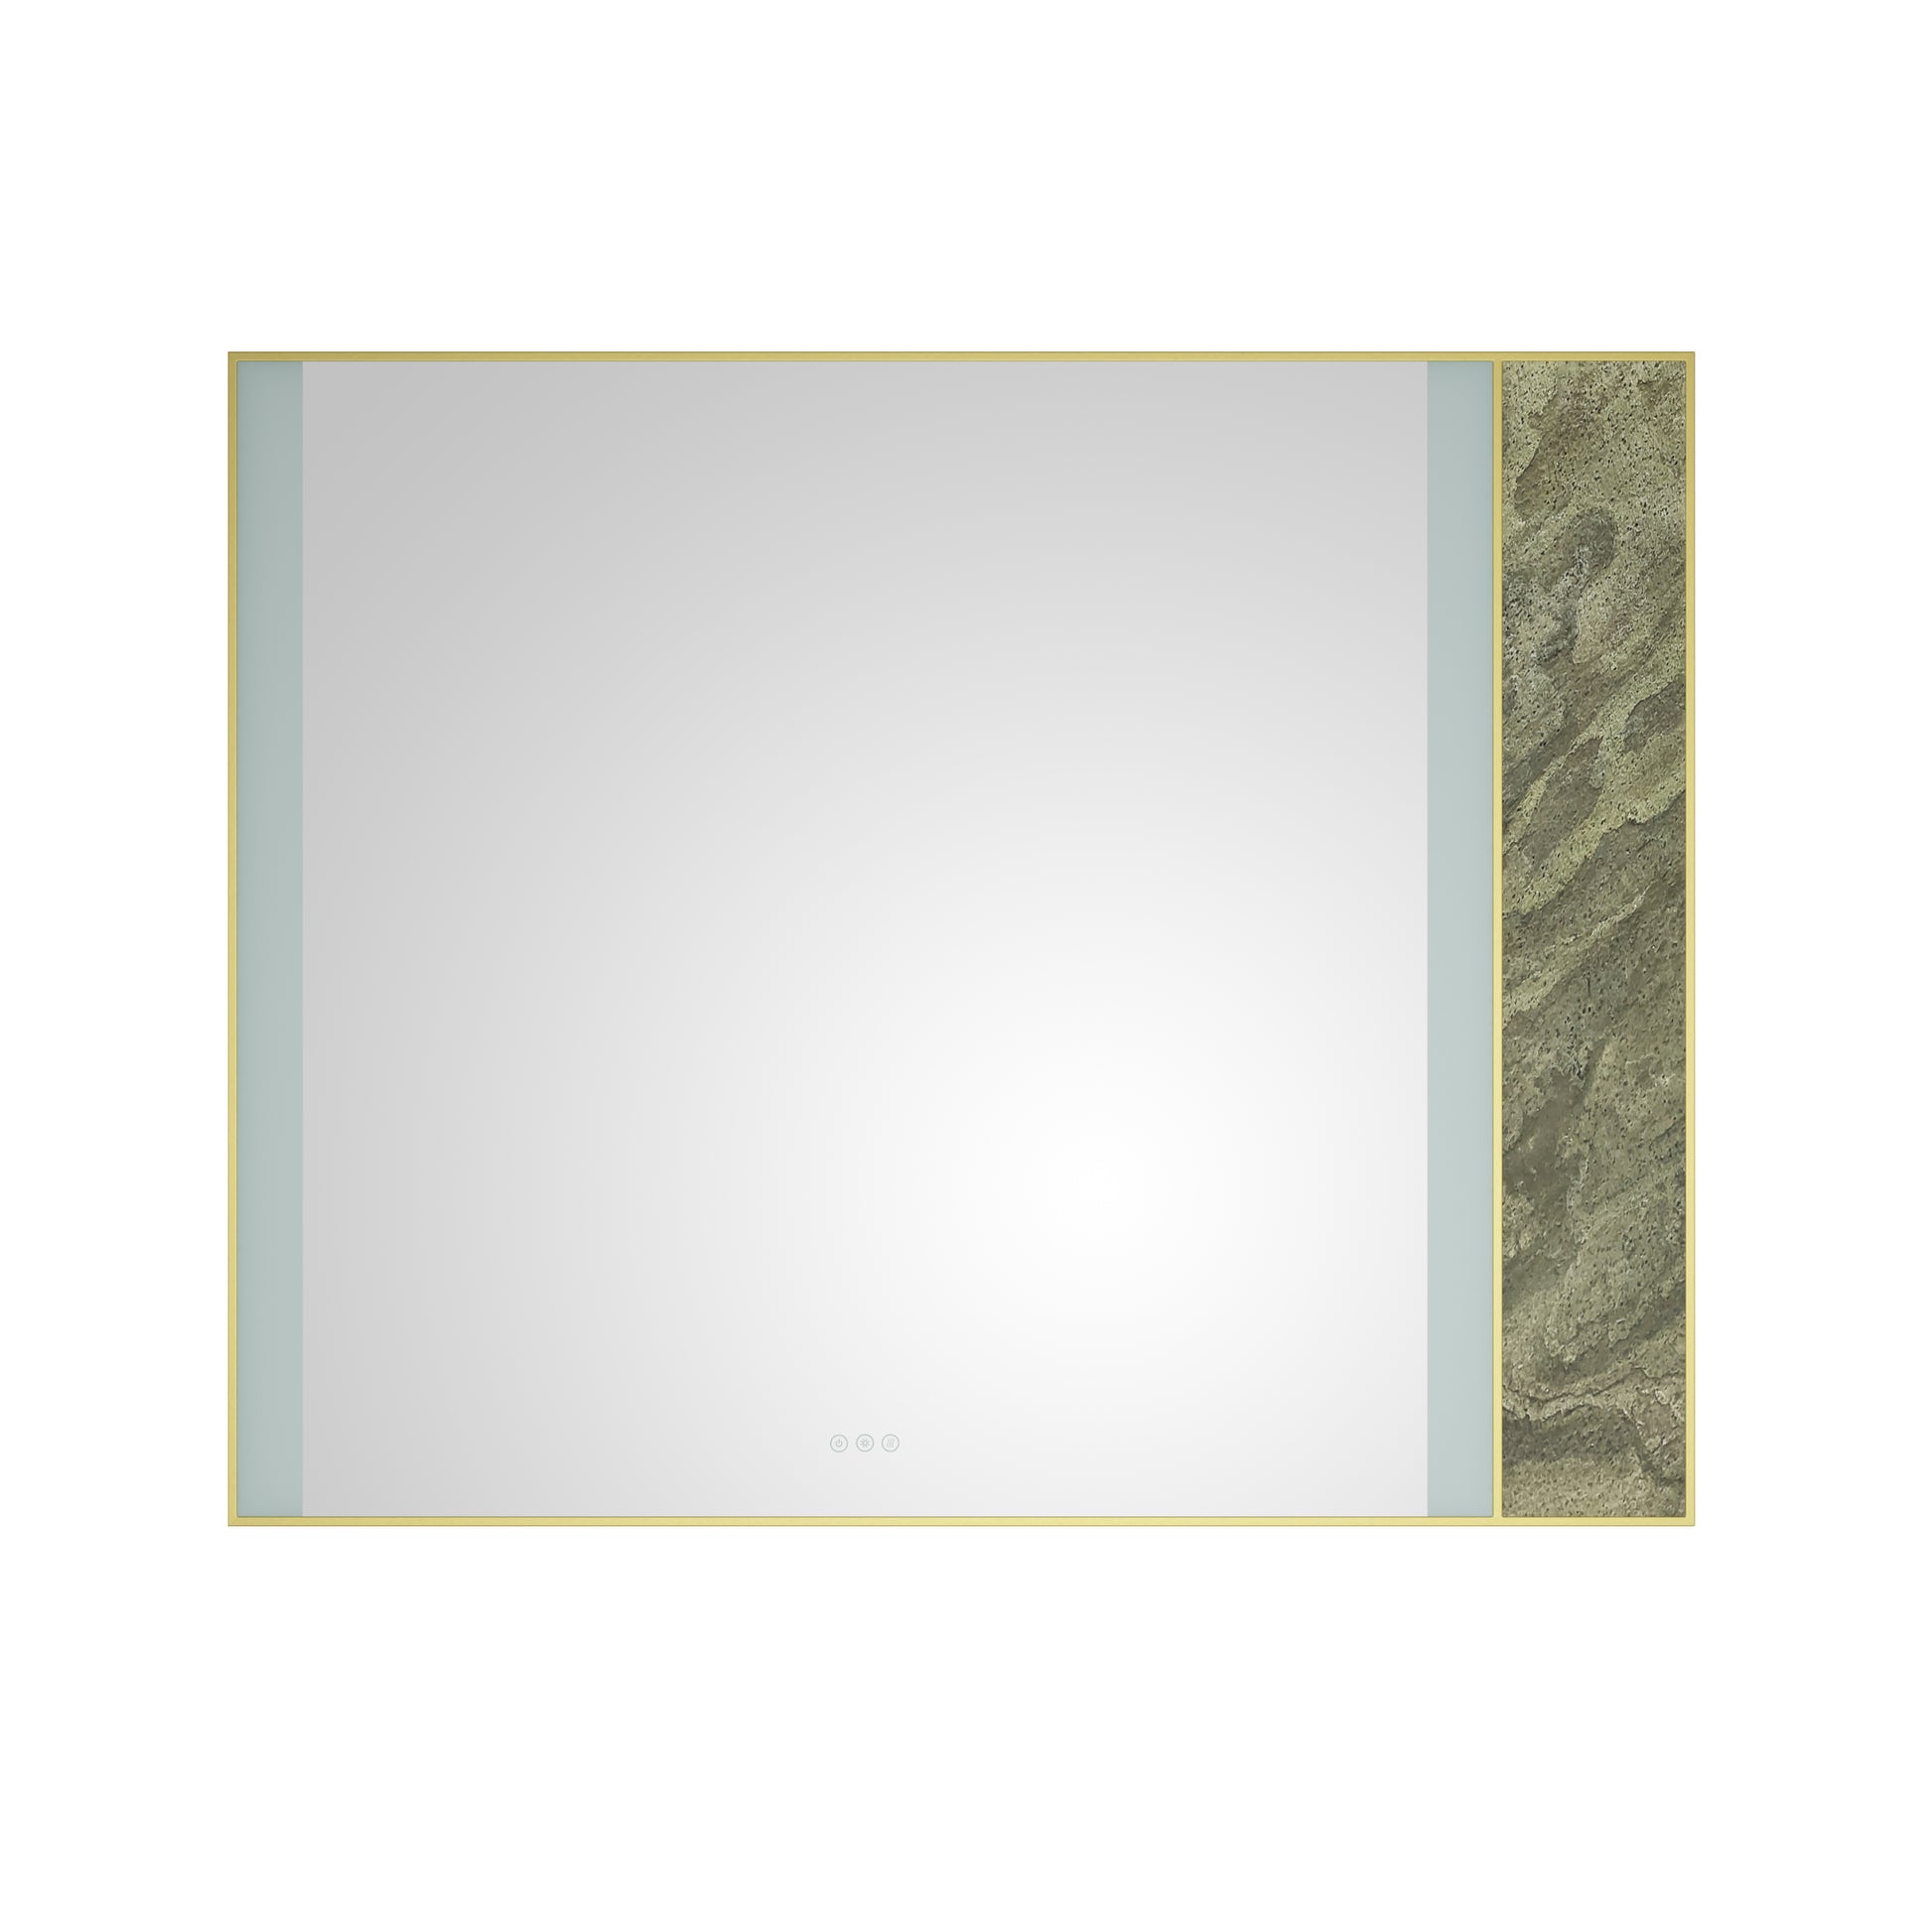 60in. W x 48 in. H LED Lighted Bathroom Wall Mounted gold-aluminium